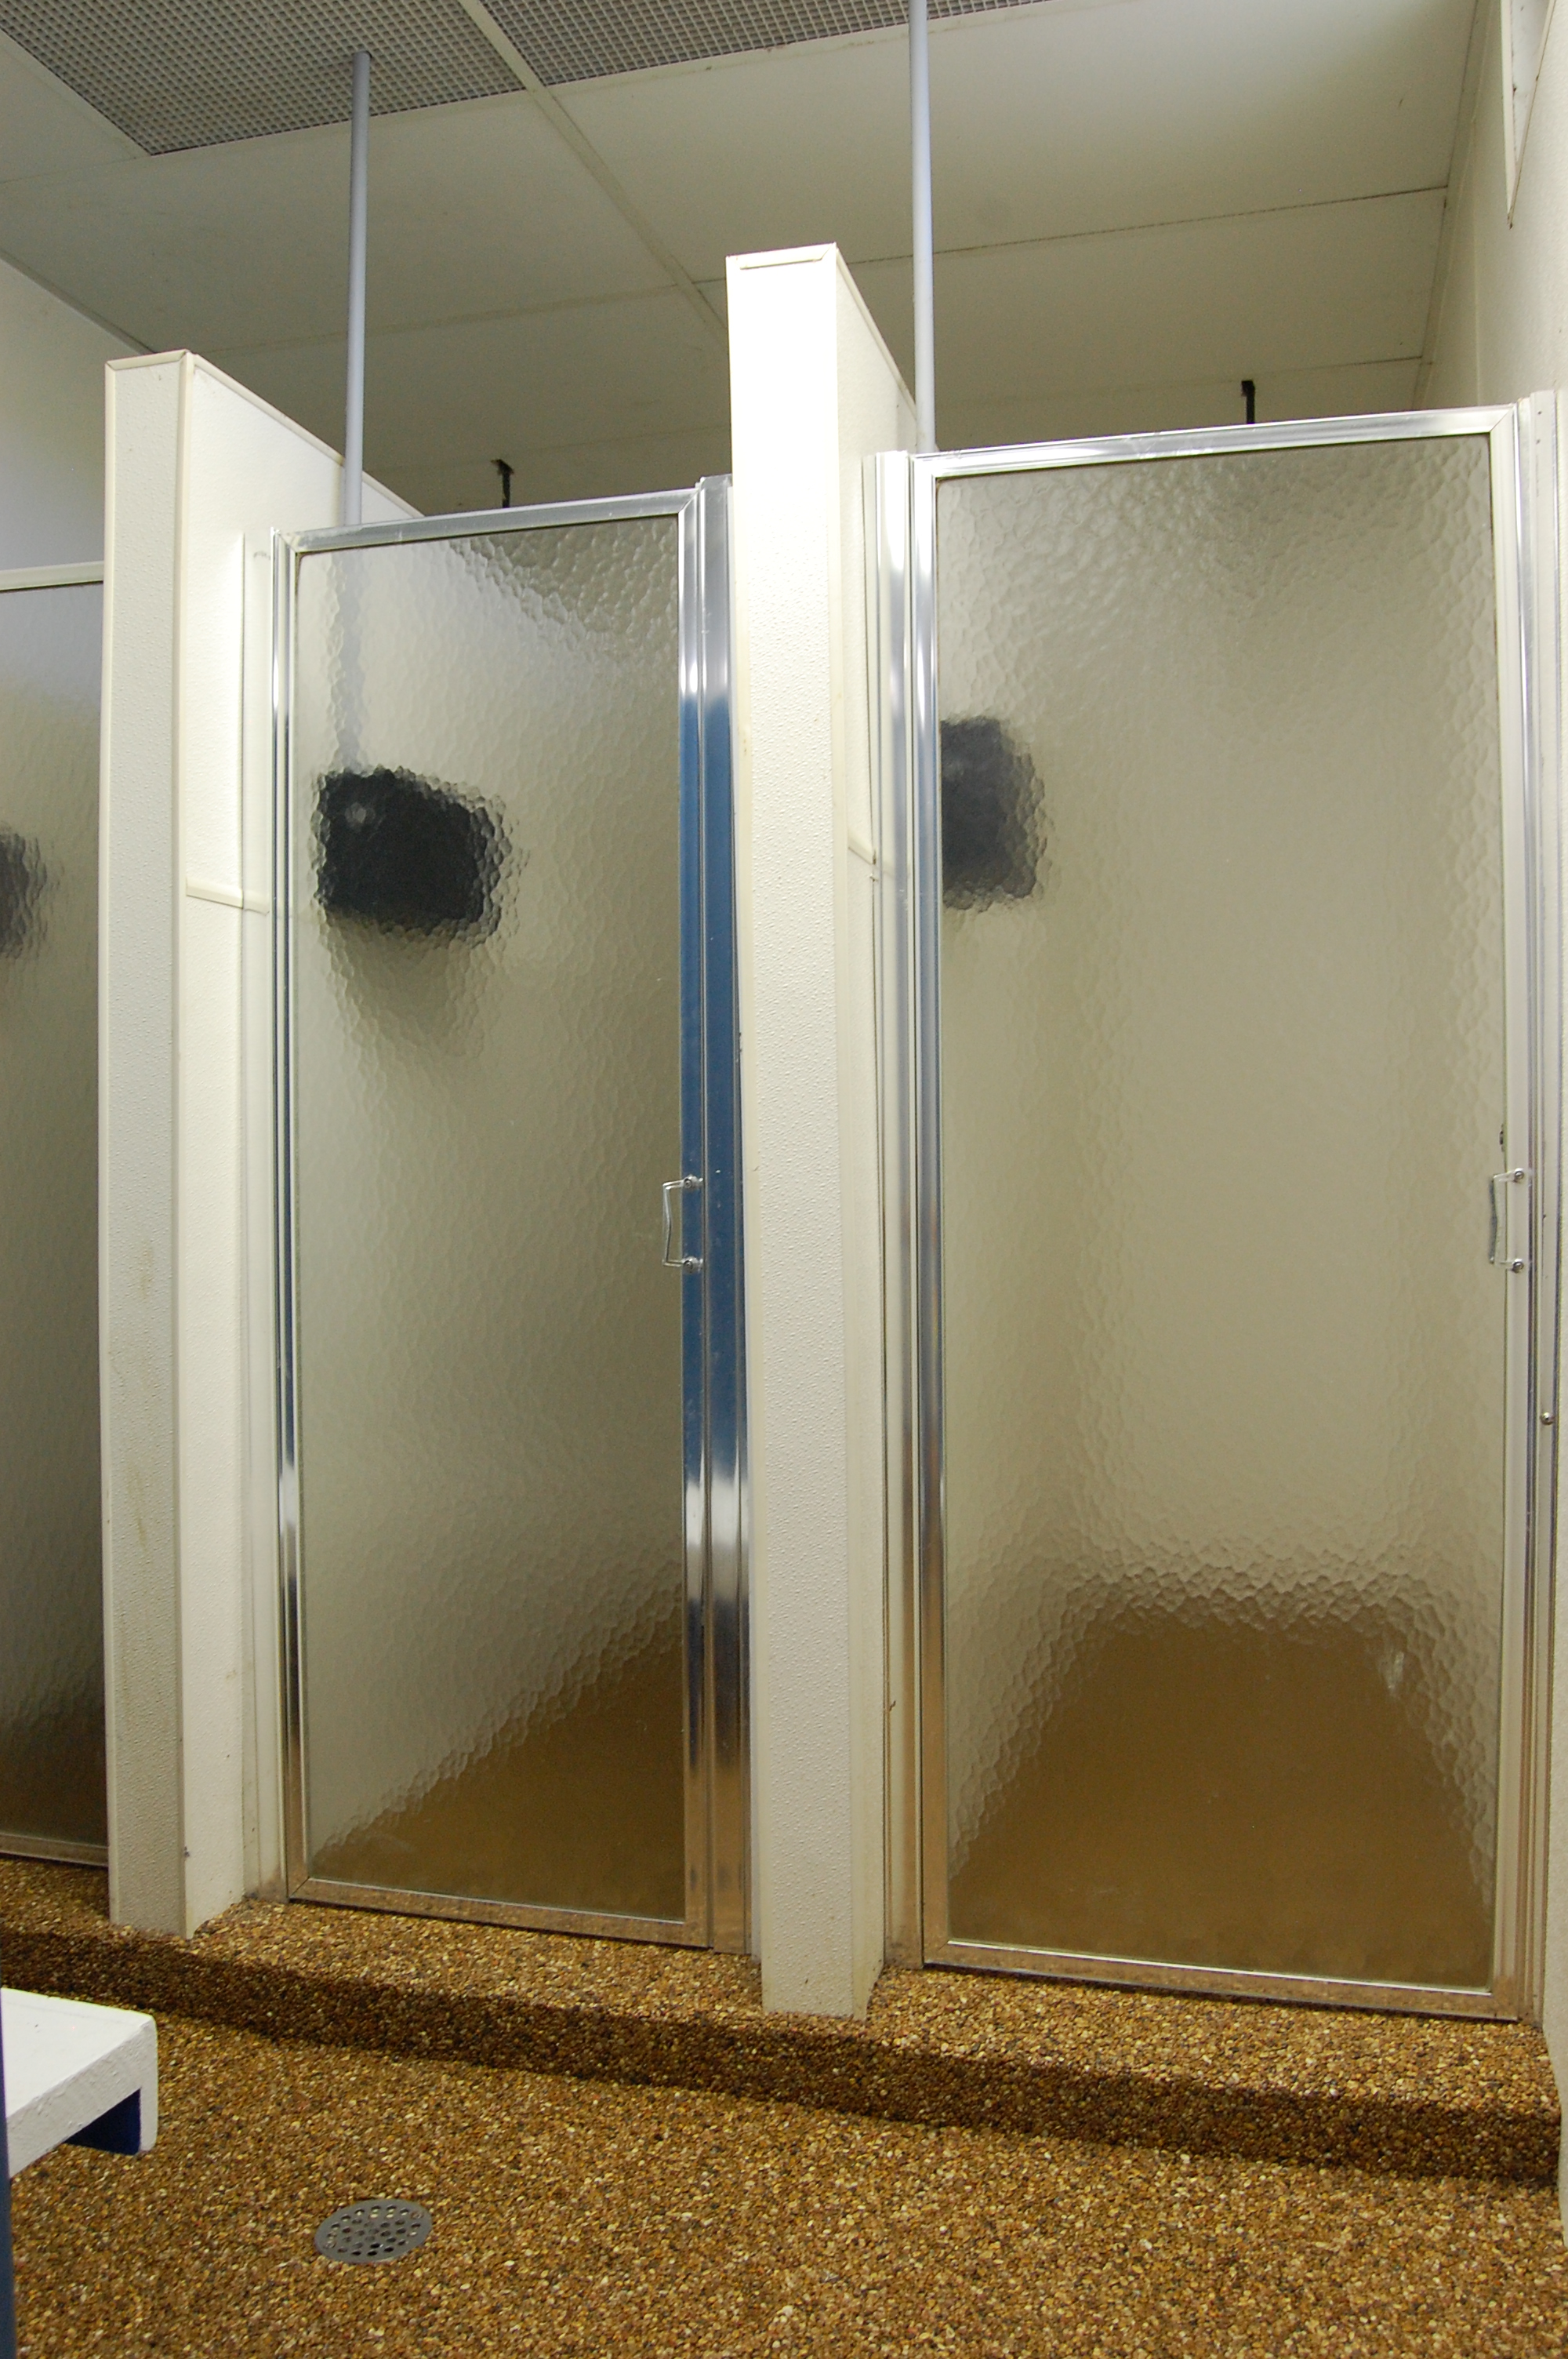 Maple Grove Marina - Restrooms & Shower House